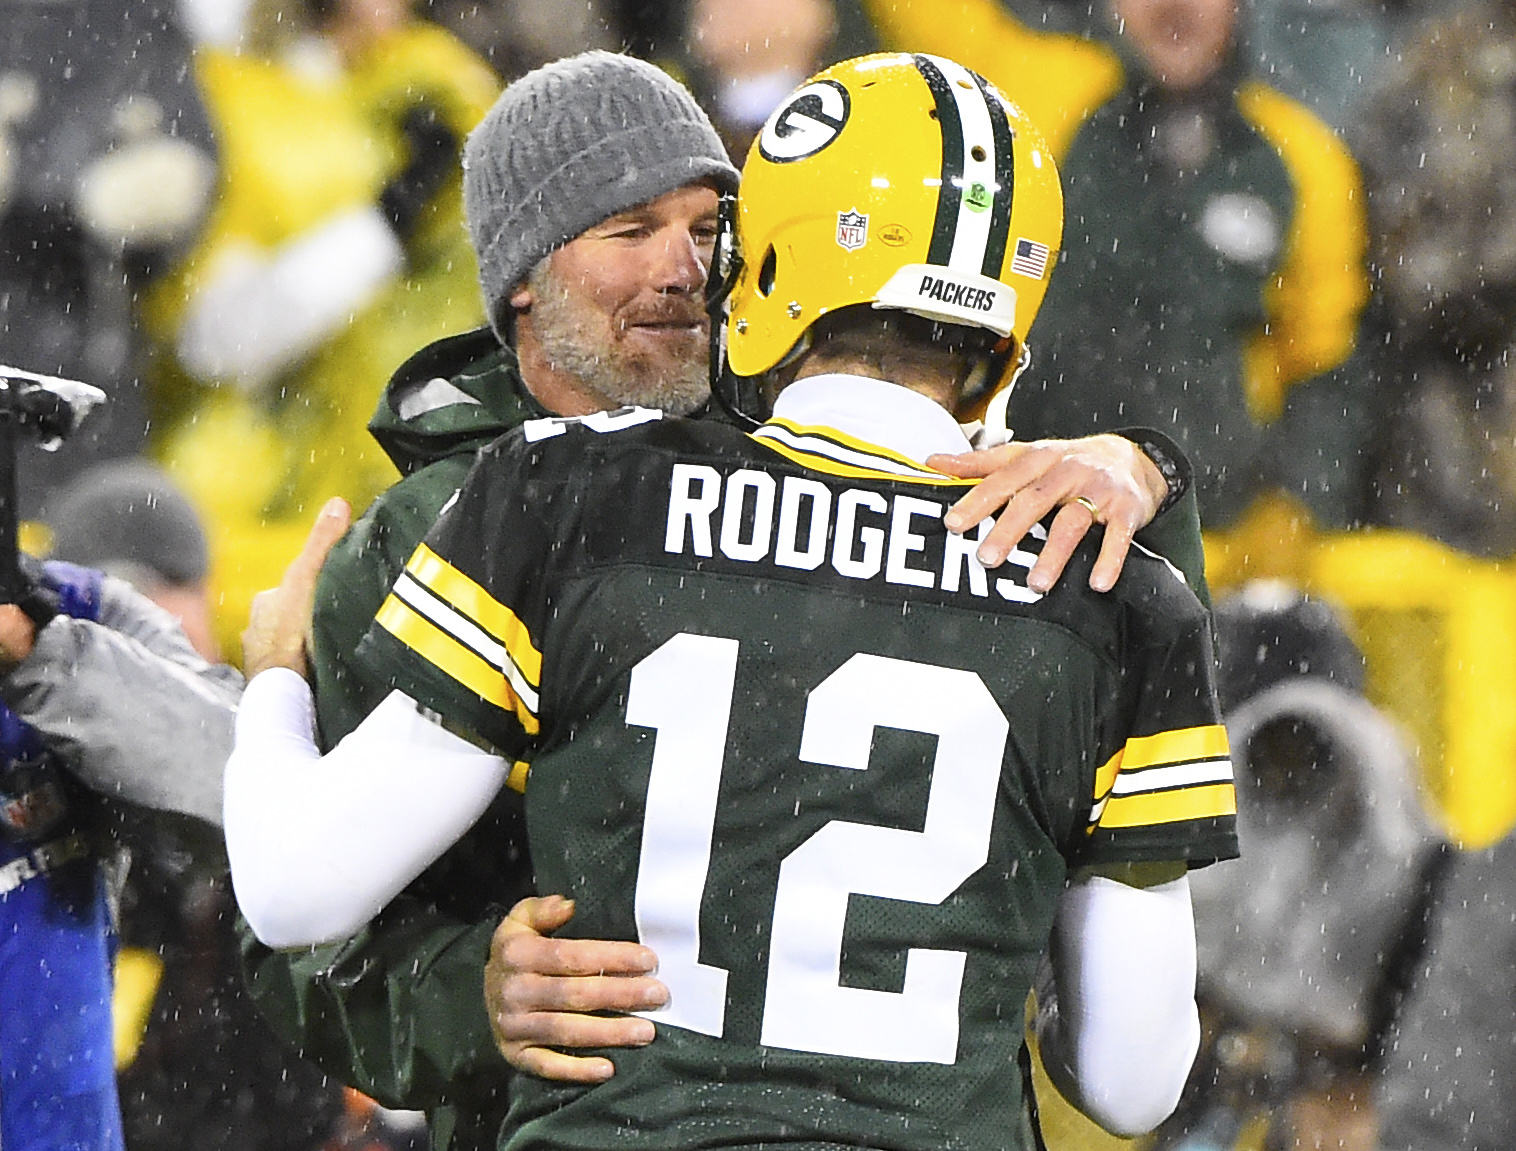 Brett Favre jersey won't be retired by the Packers this season